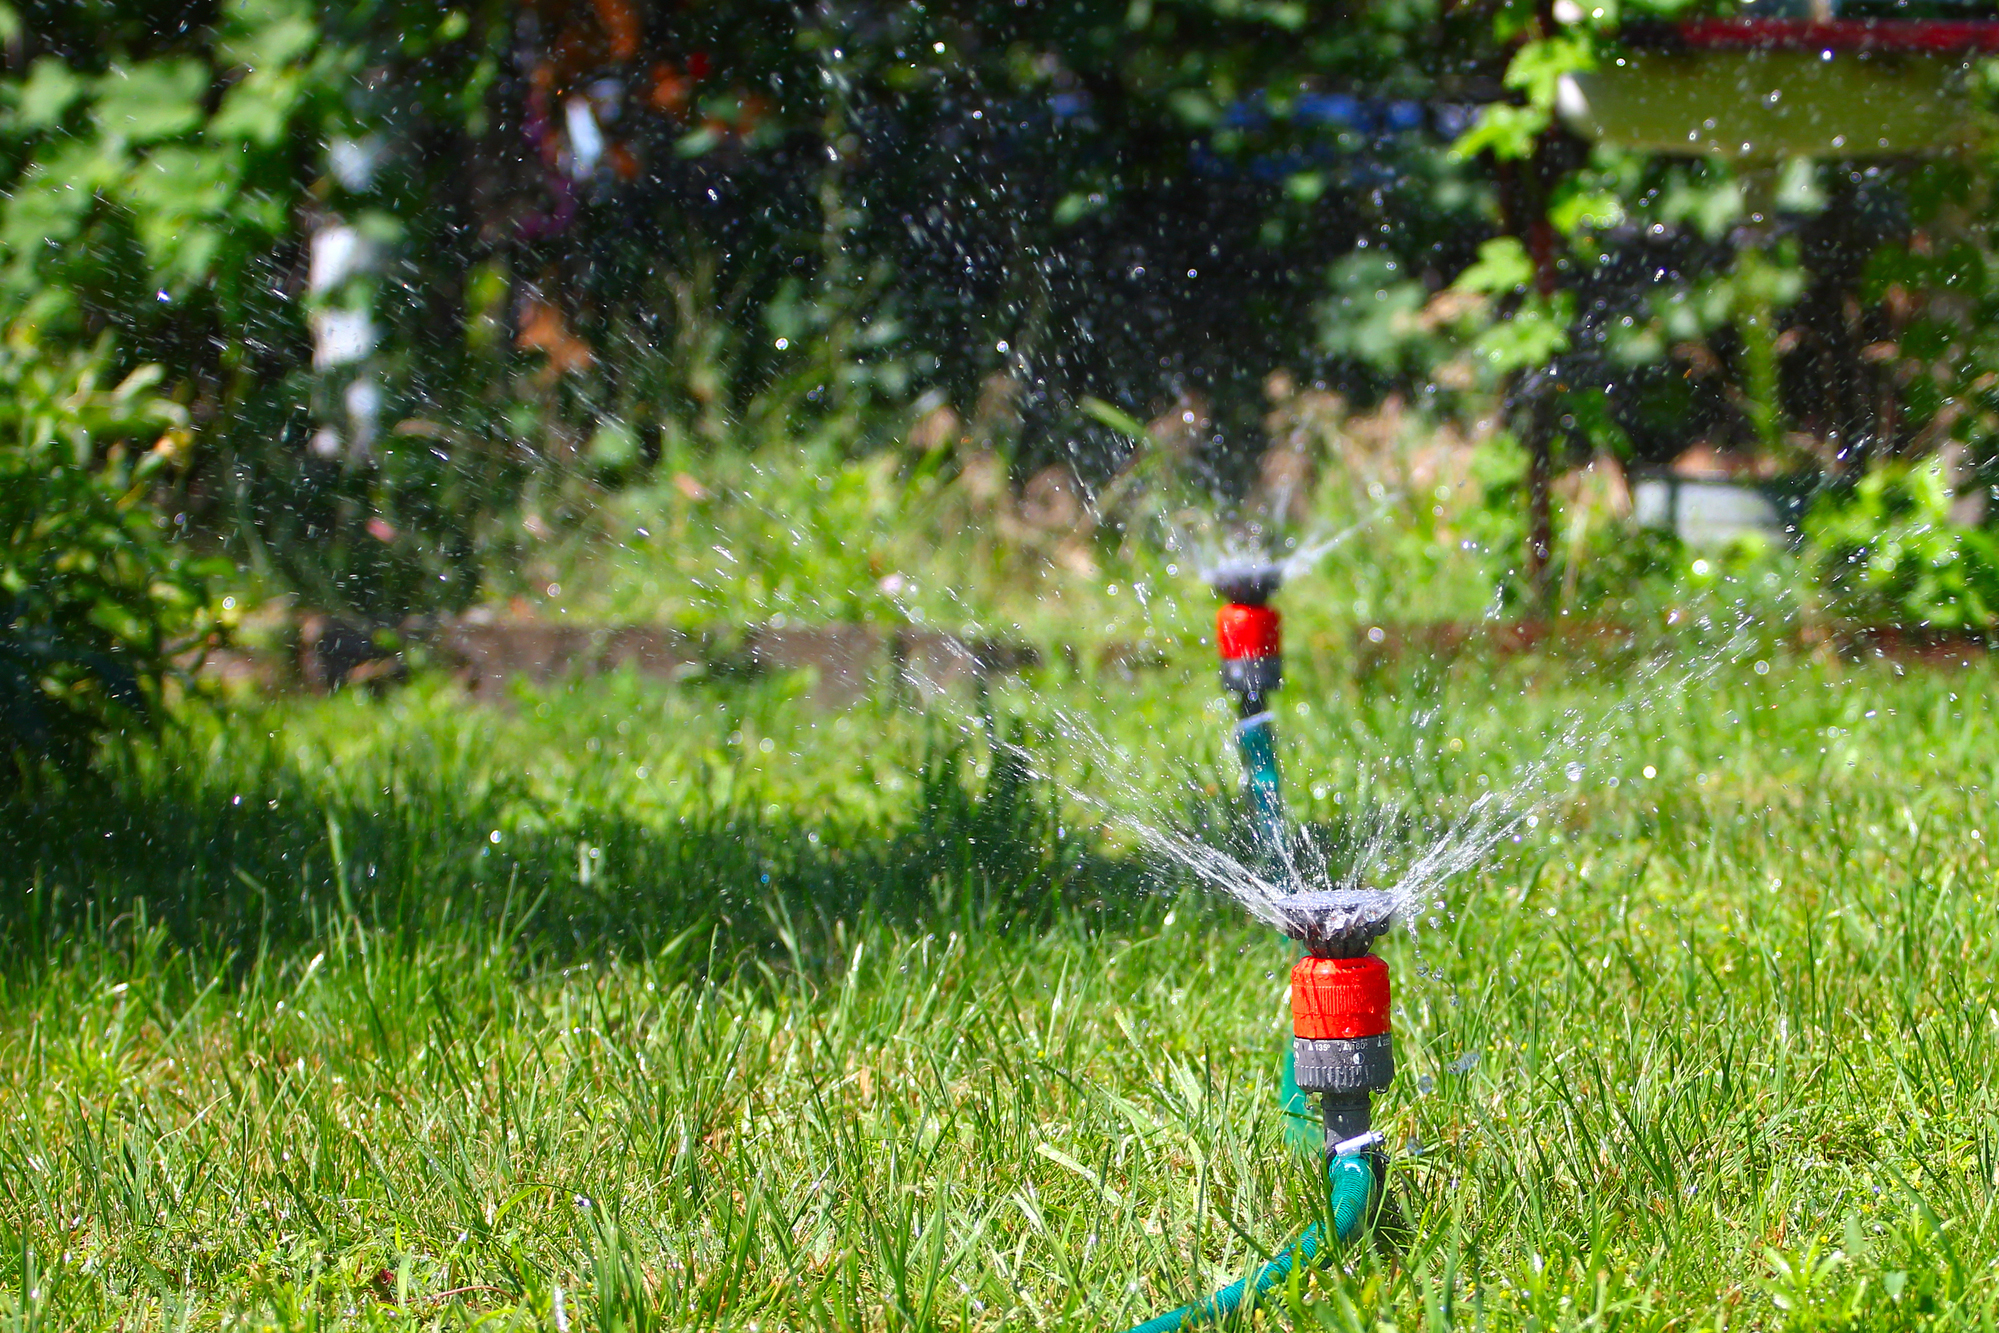 Irrigation Emergency? We've Got You Covered with Repair Services